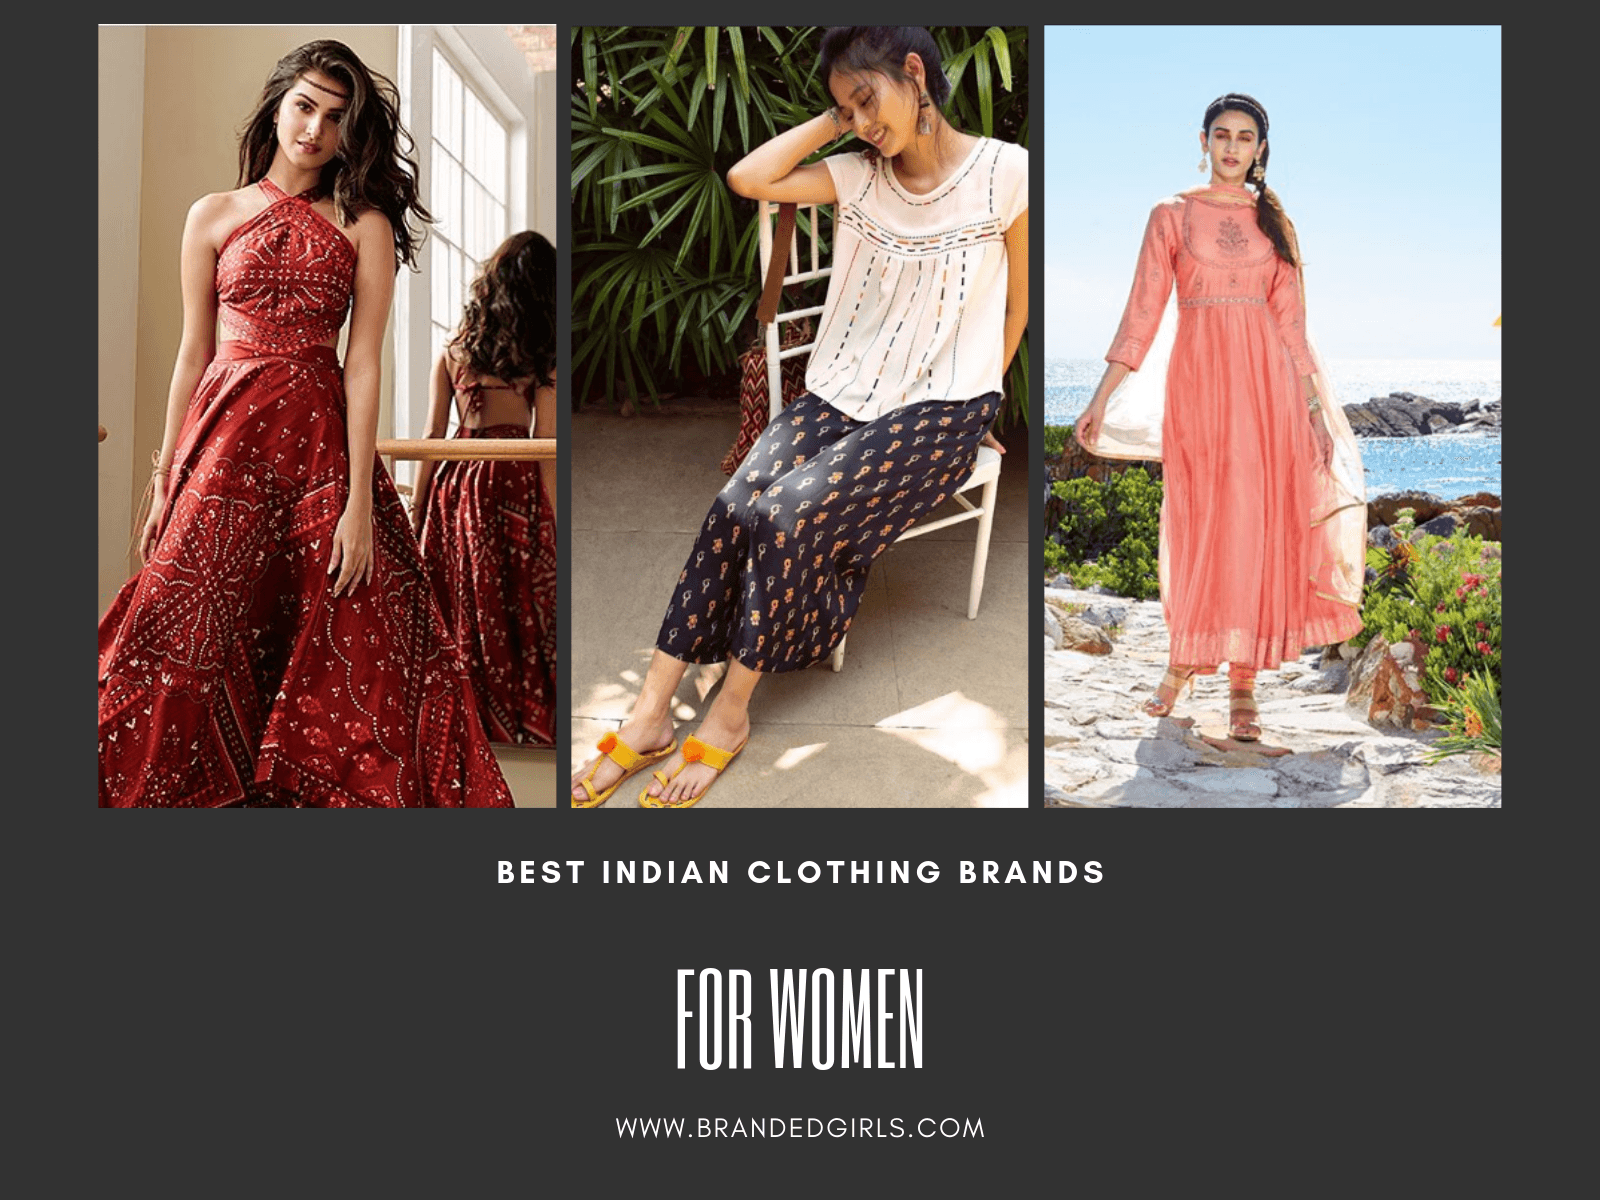 Top 10 Women Clothing Brands in India 2019 List